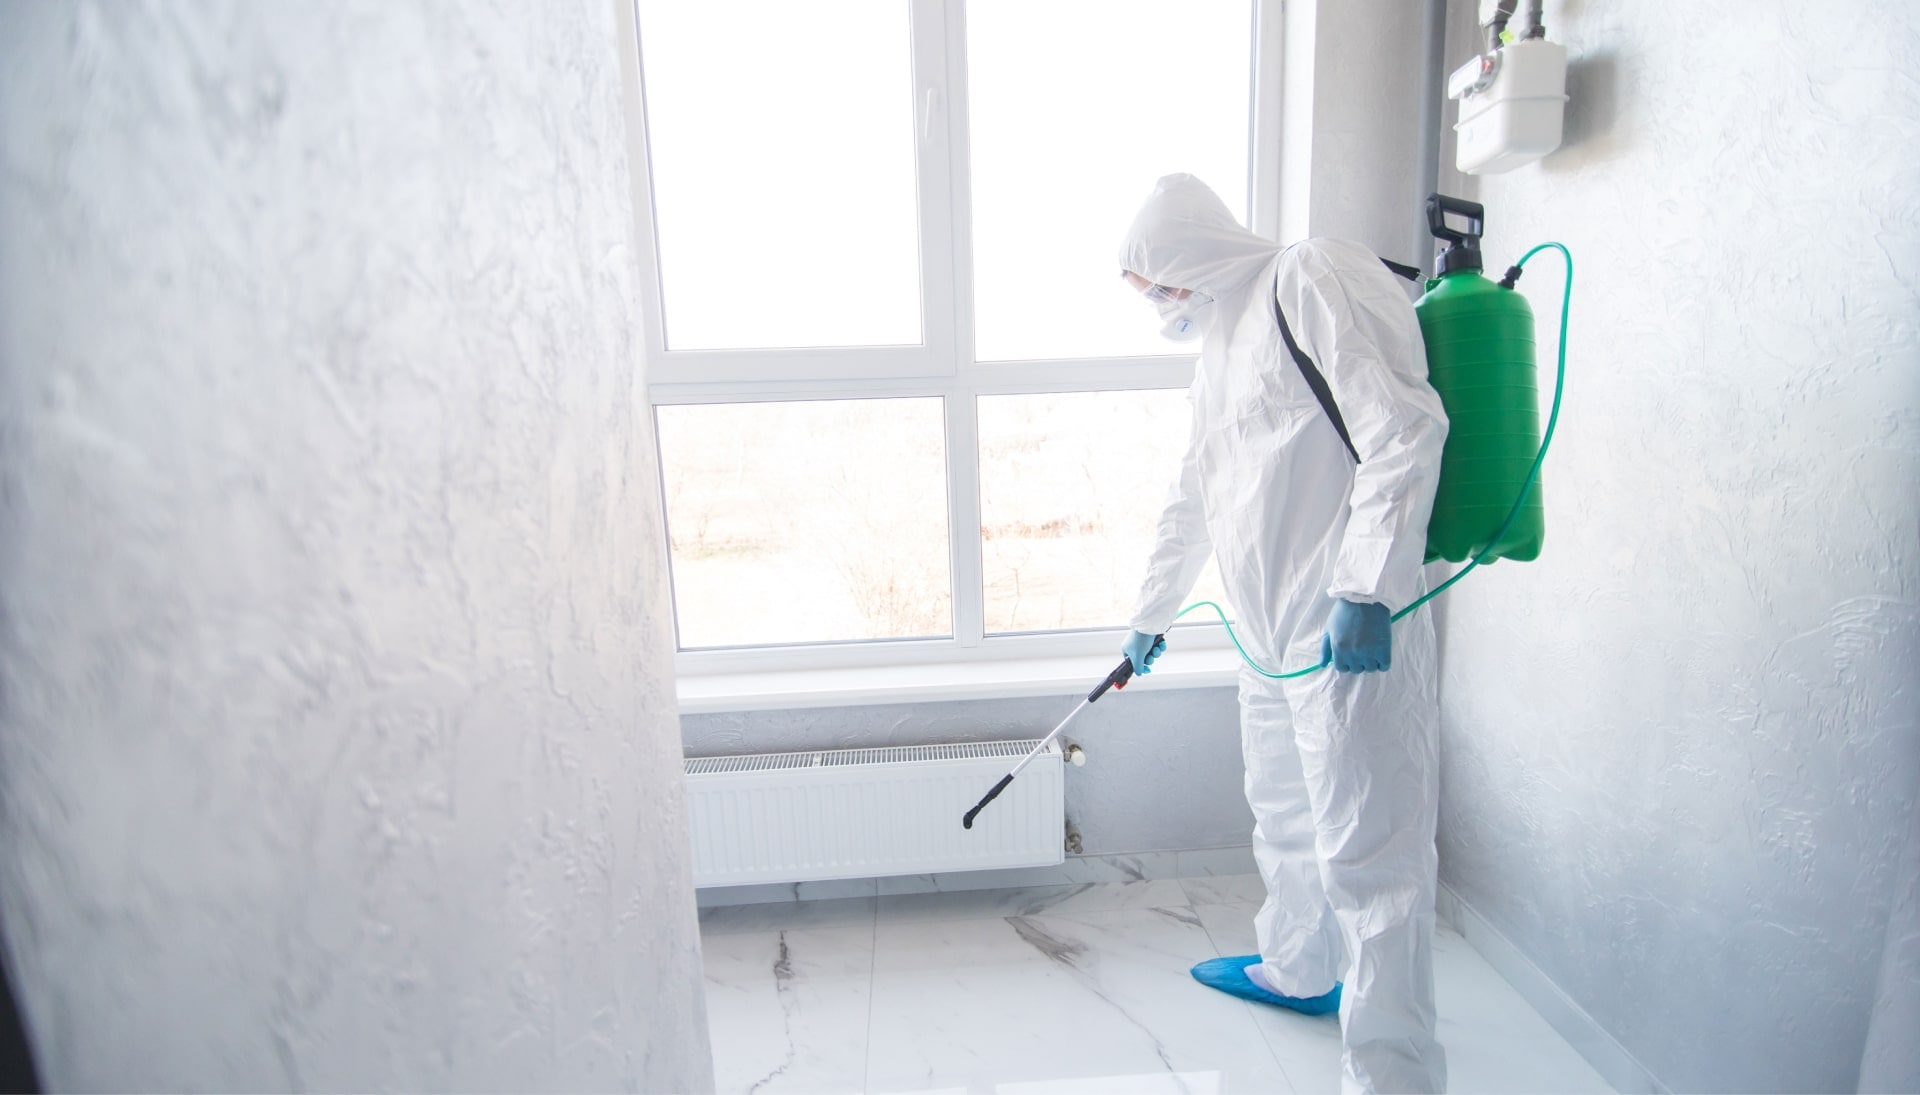 We provide the highest-quality mold inspection, testing, and removal services in the Pensacola, Florida area.